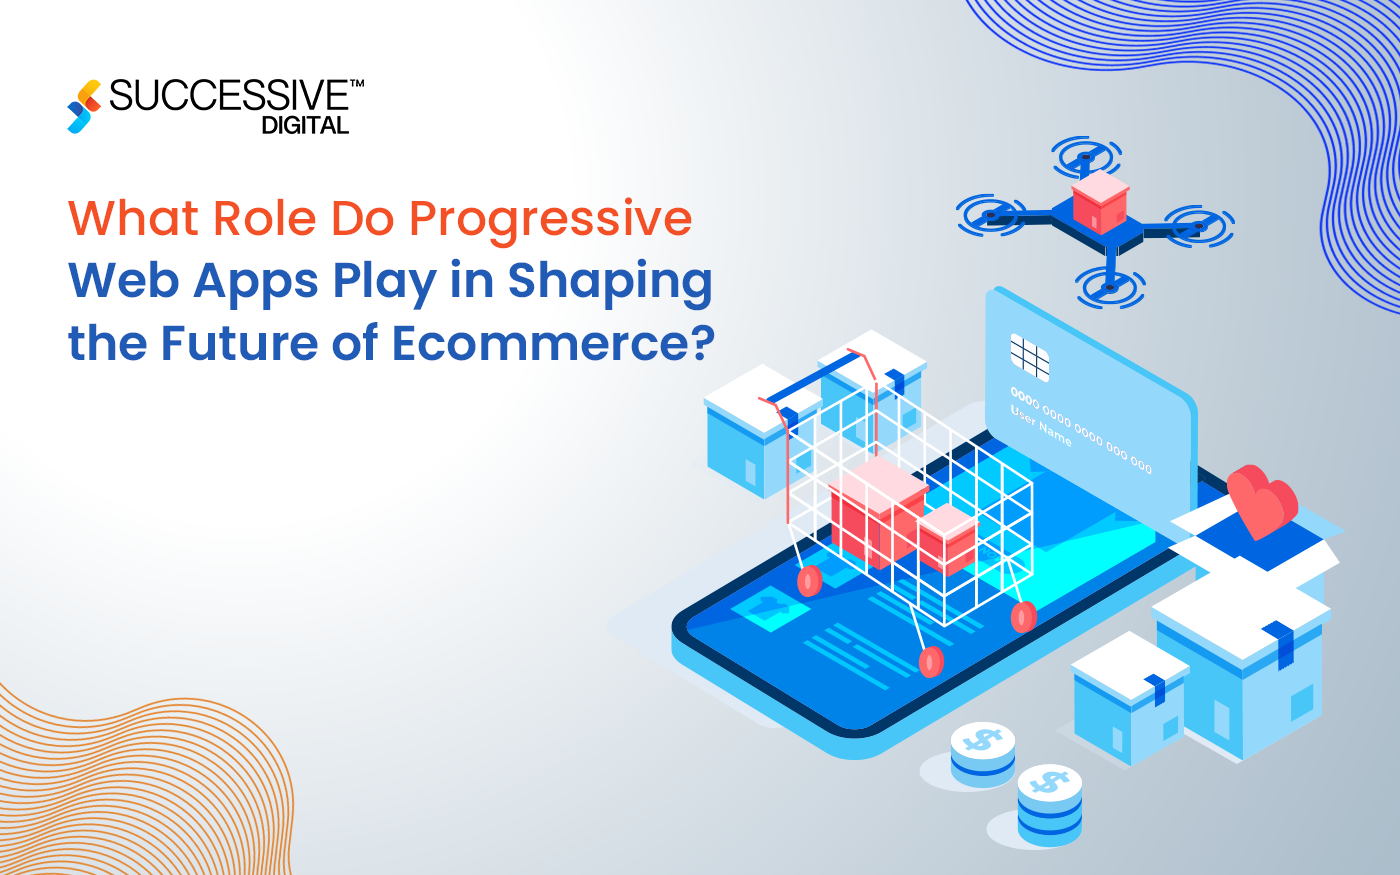 What Role Do Progressive Web Apps Play in Shaping the Future of Ecommerce?